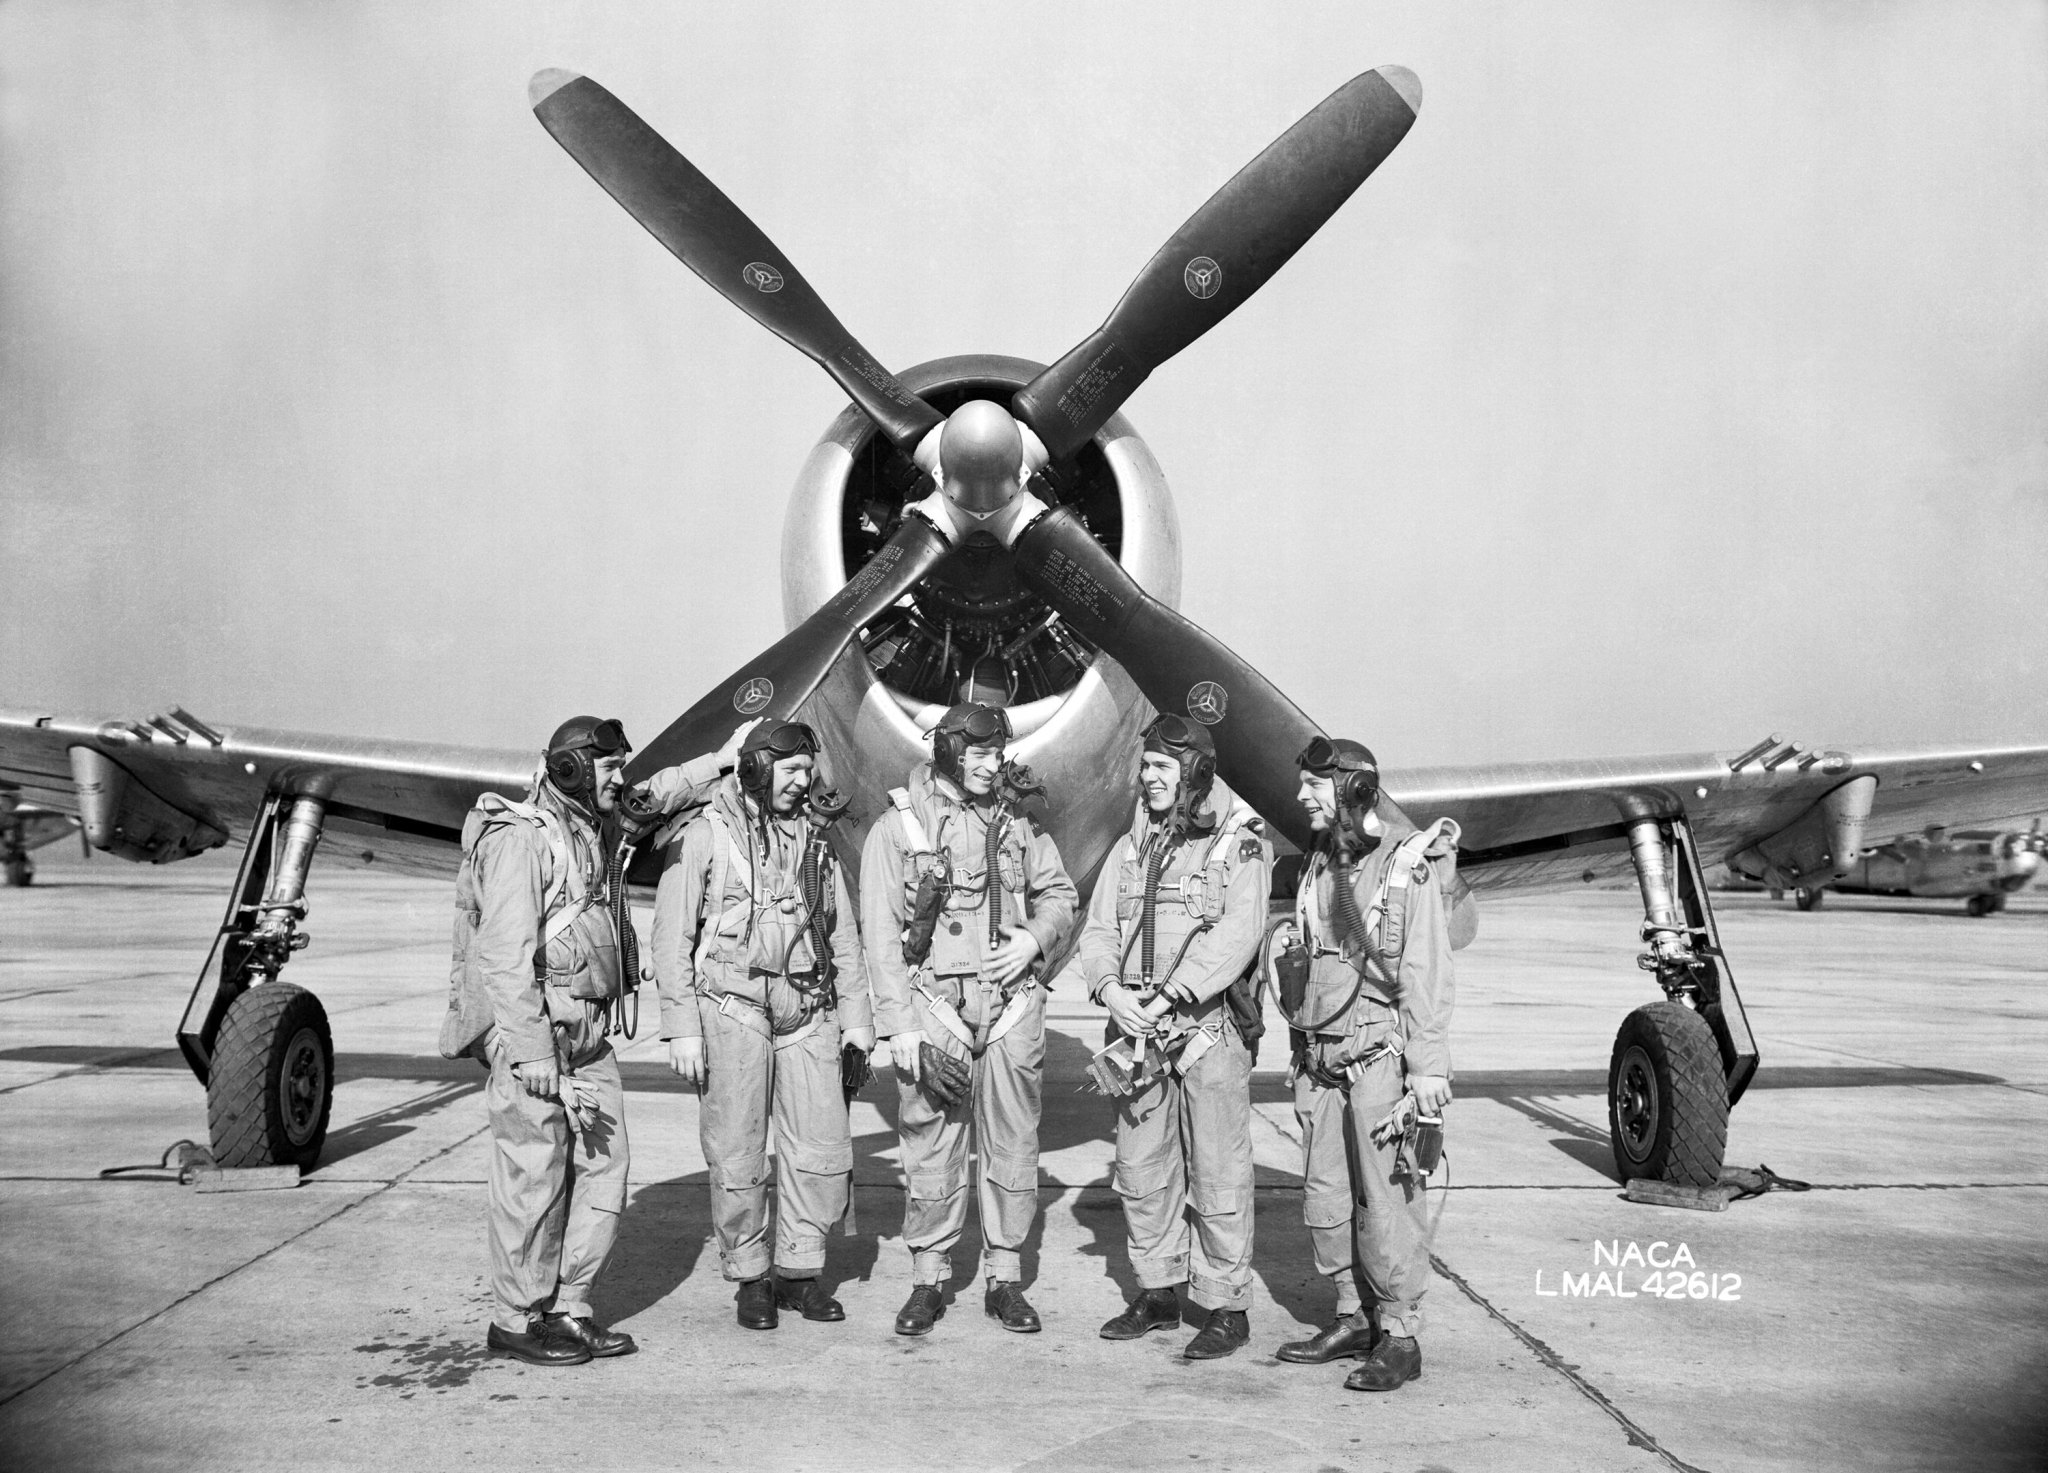 Langley research pilots in front of P-47 fighter